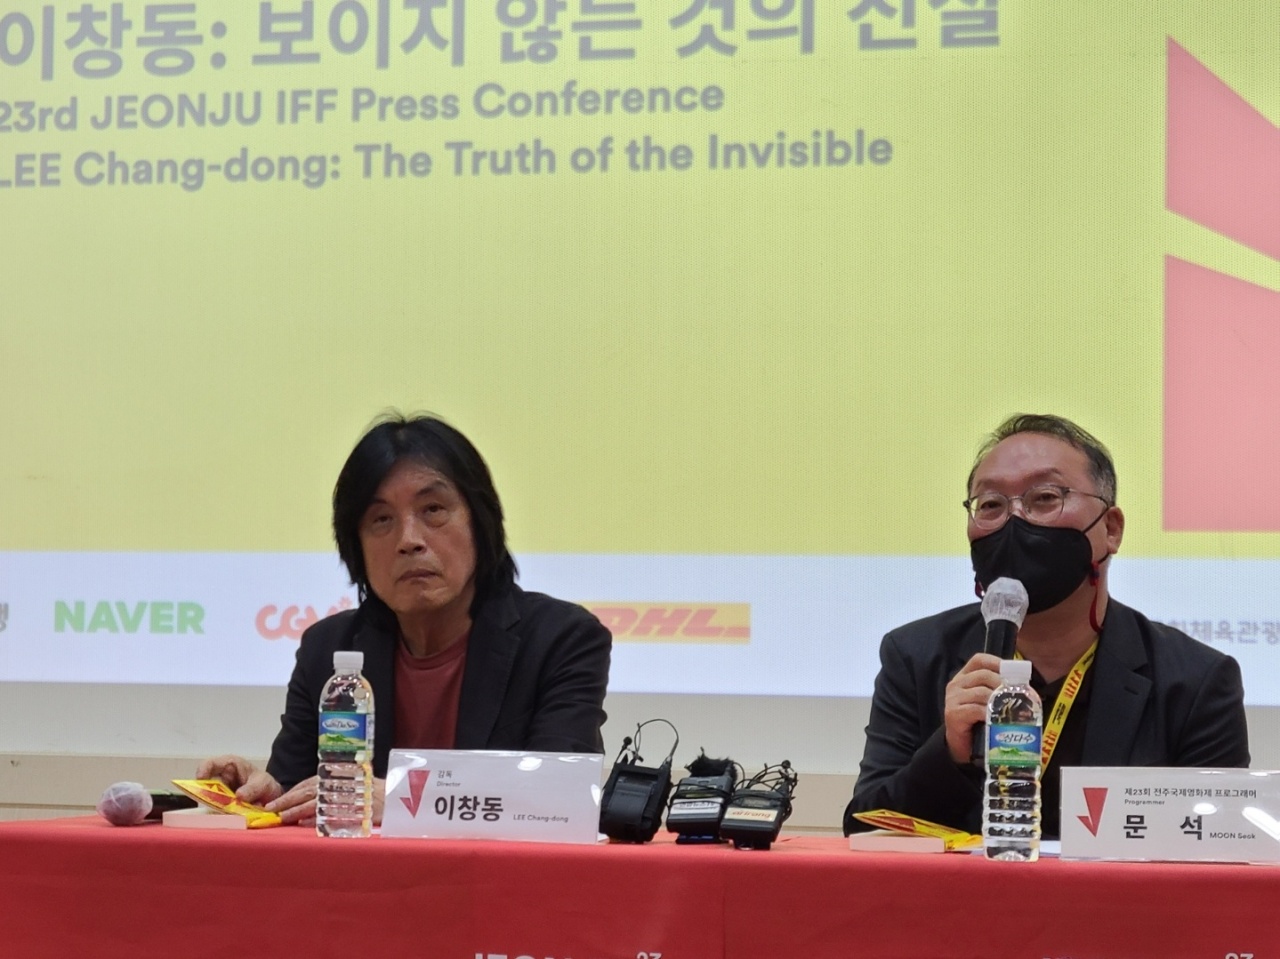 From left: Director Lee Chang-dong and Jeonju International Film Festival co-programmer Moon Seok speak during a press conference held at the Jeonju Jungbu Vision Center in Jeonju, North Jeolla Province.  (Song Seung-hyun/The Korea Herald)